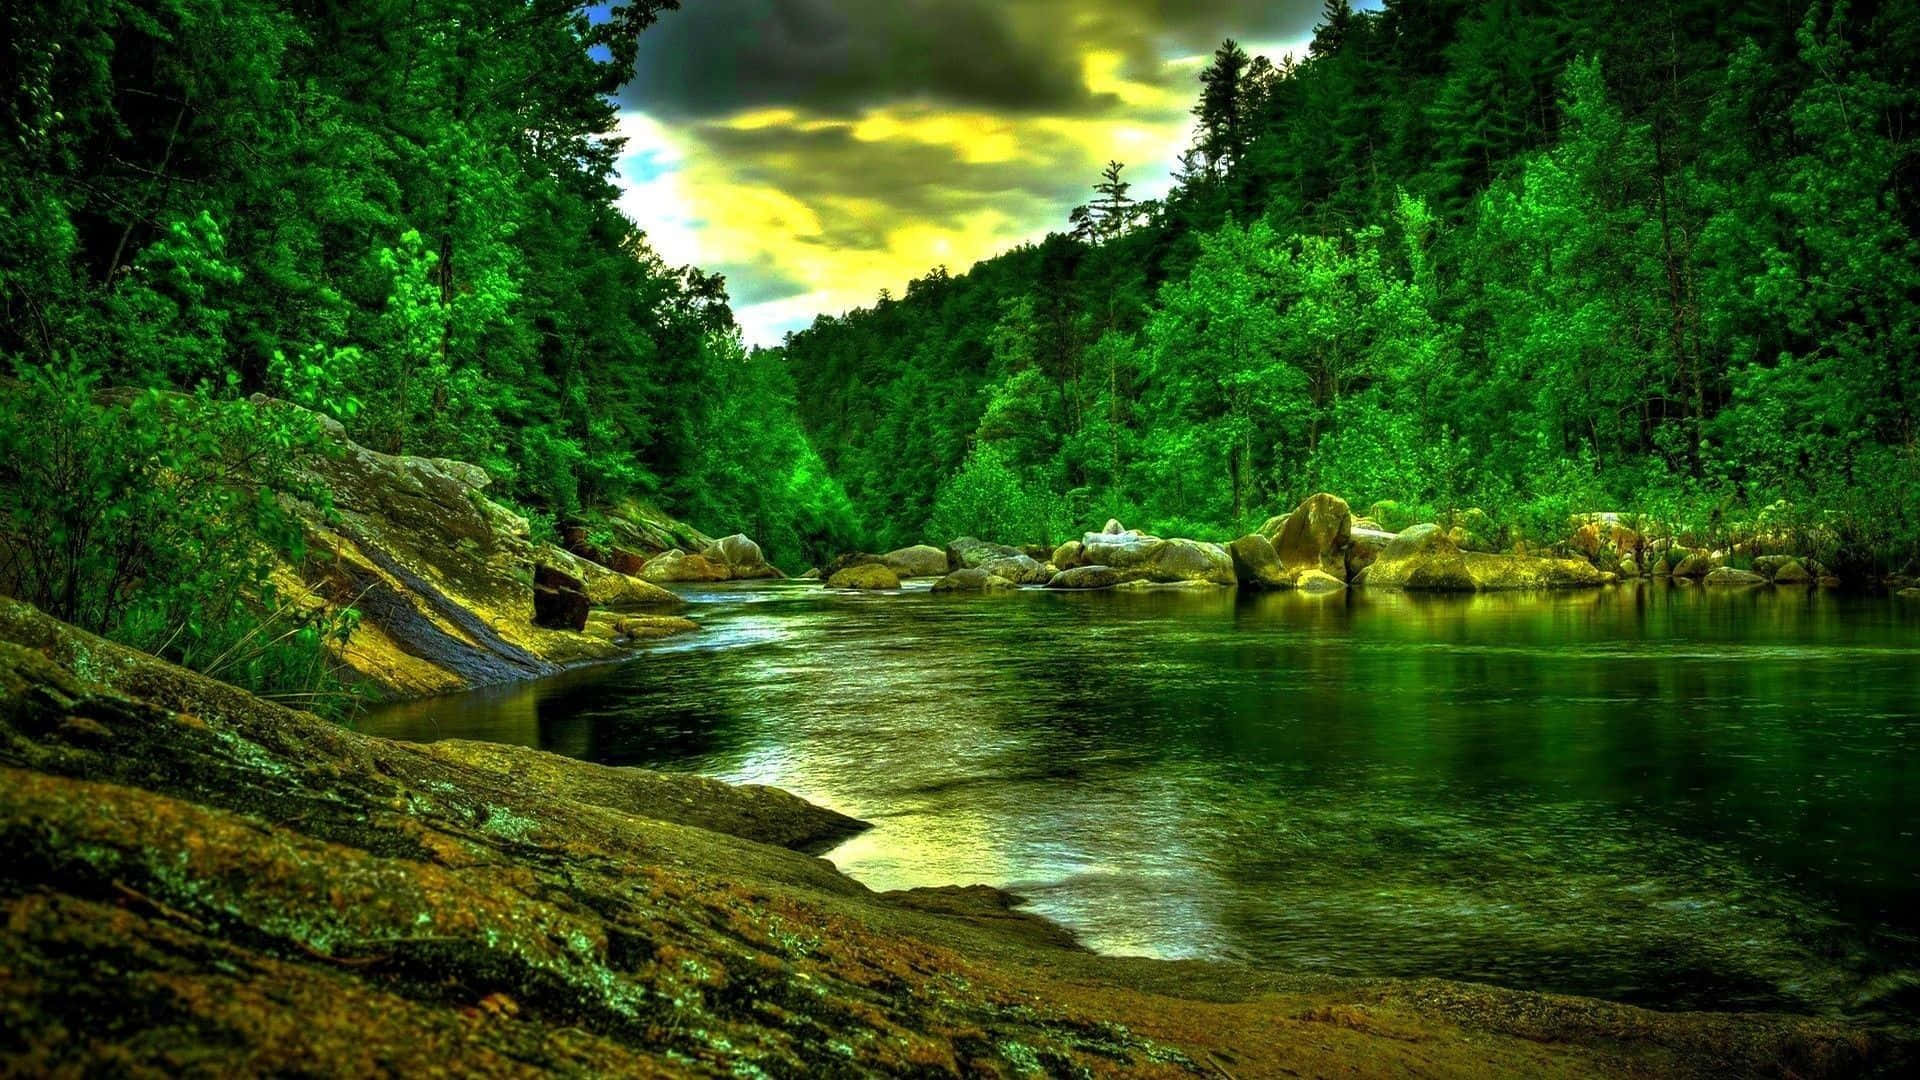 "A peaceful moment in the pristine beauty of a Forest Green landscape" Wallpaper